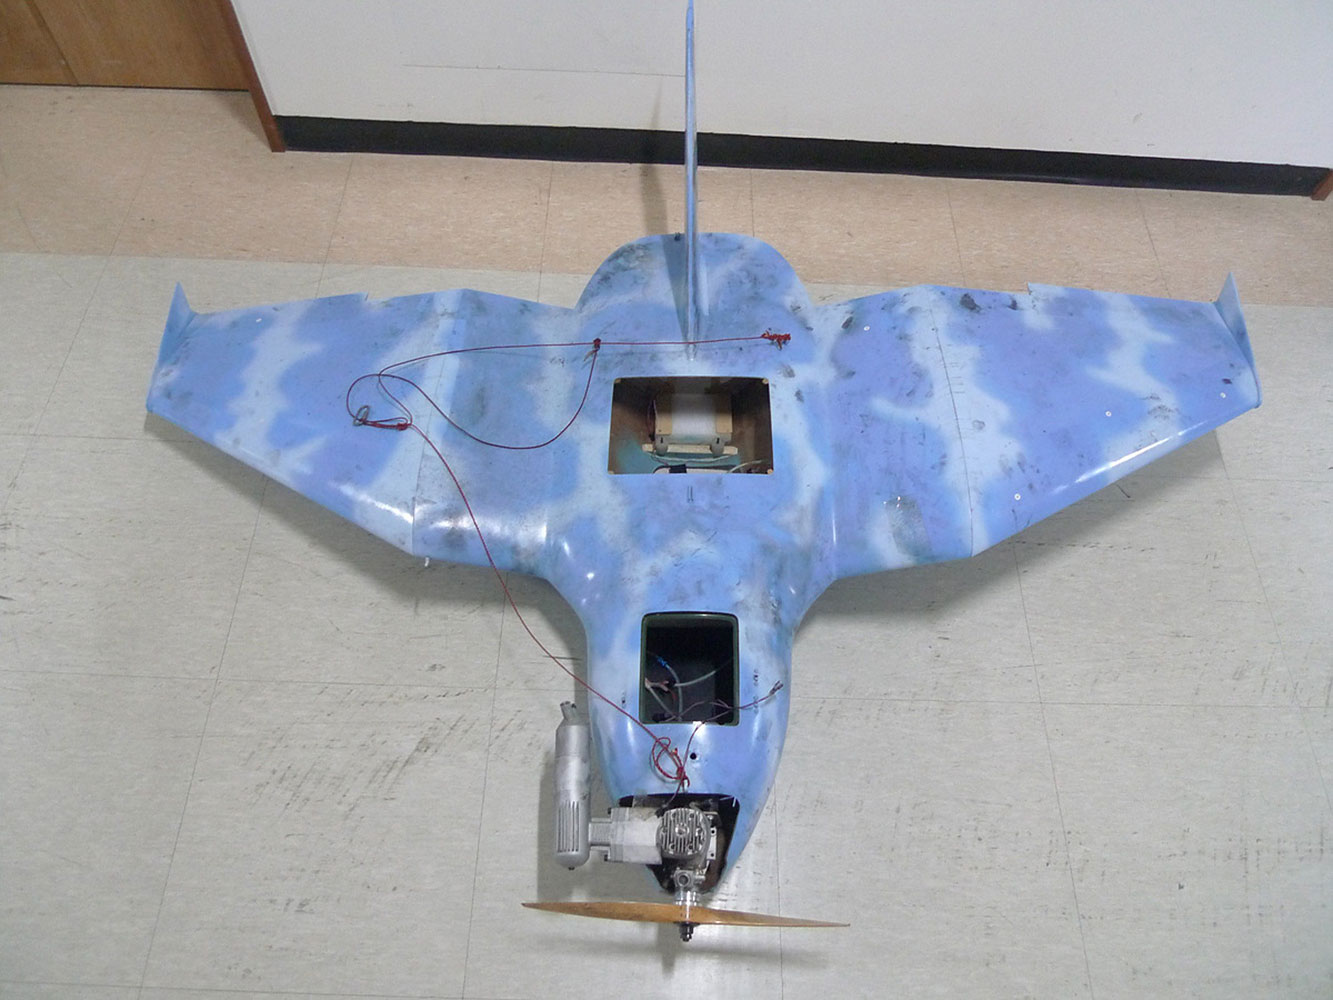 A crashed drone found on March 24, 2014 in Paju, north of Seoul.